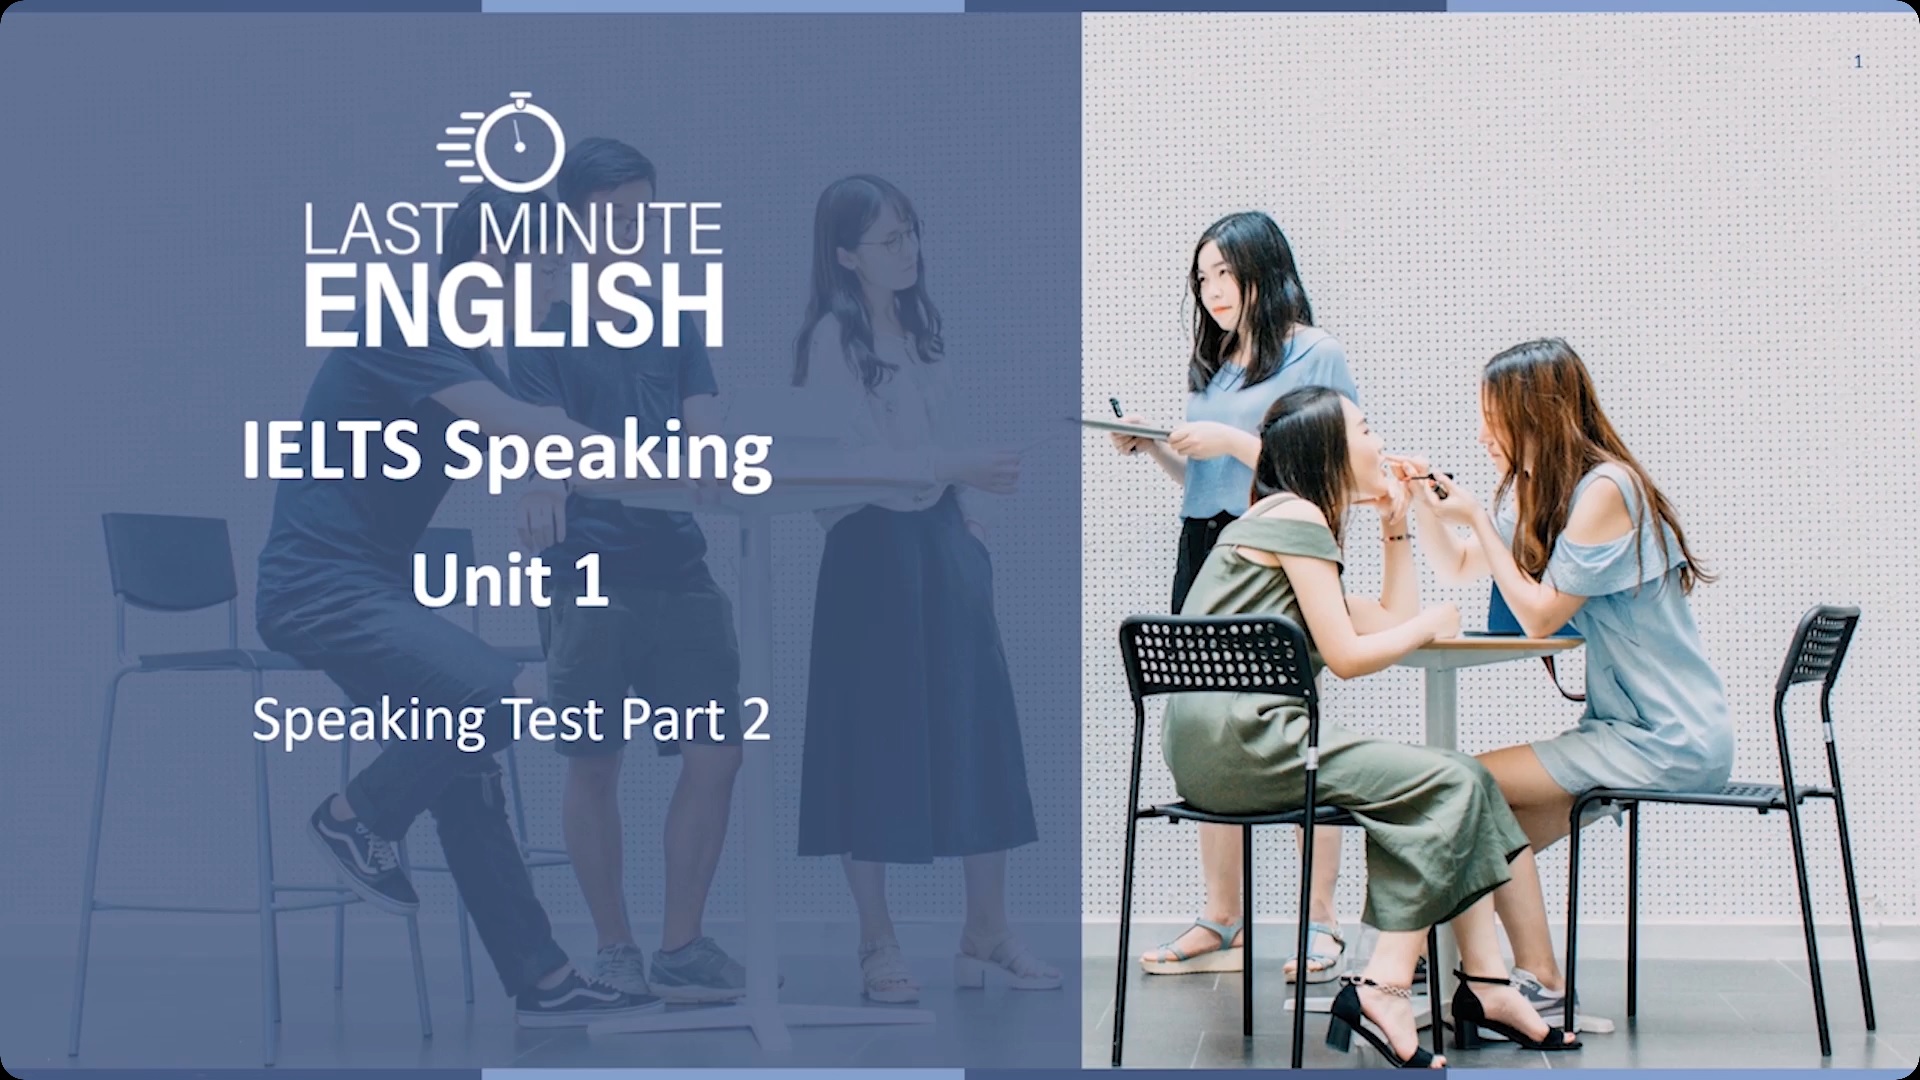 IELTS Speaking Test: Introduction to Part 2